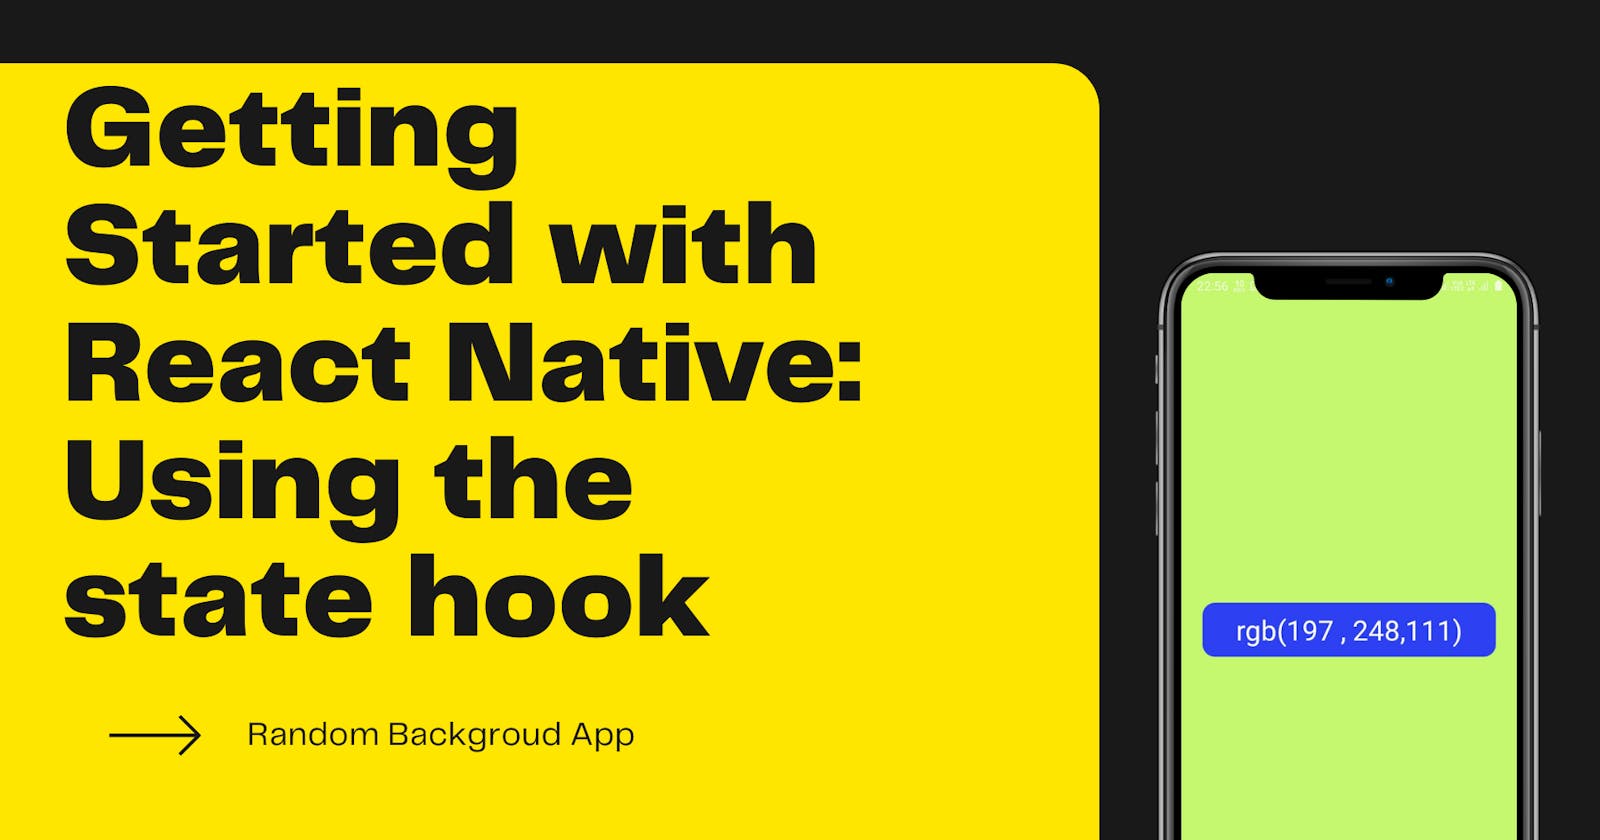 Getting Started with React Native: Using the state hook